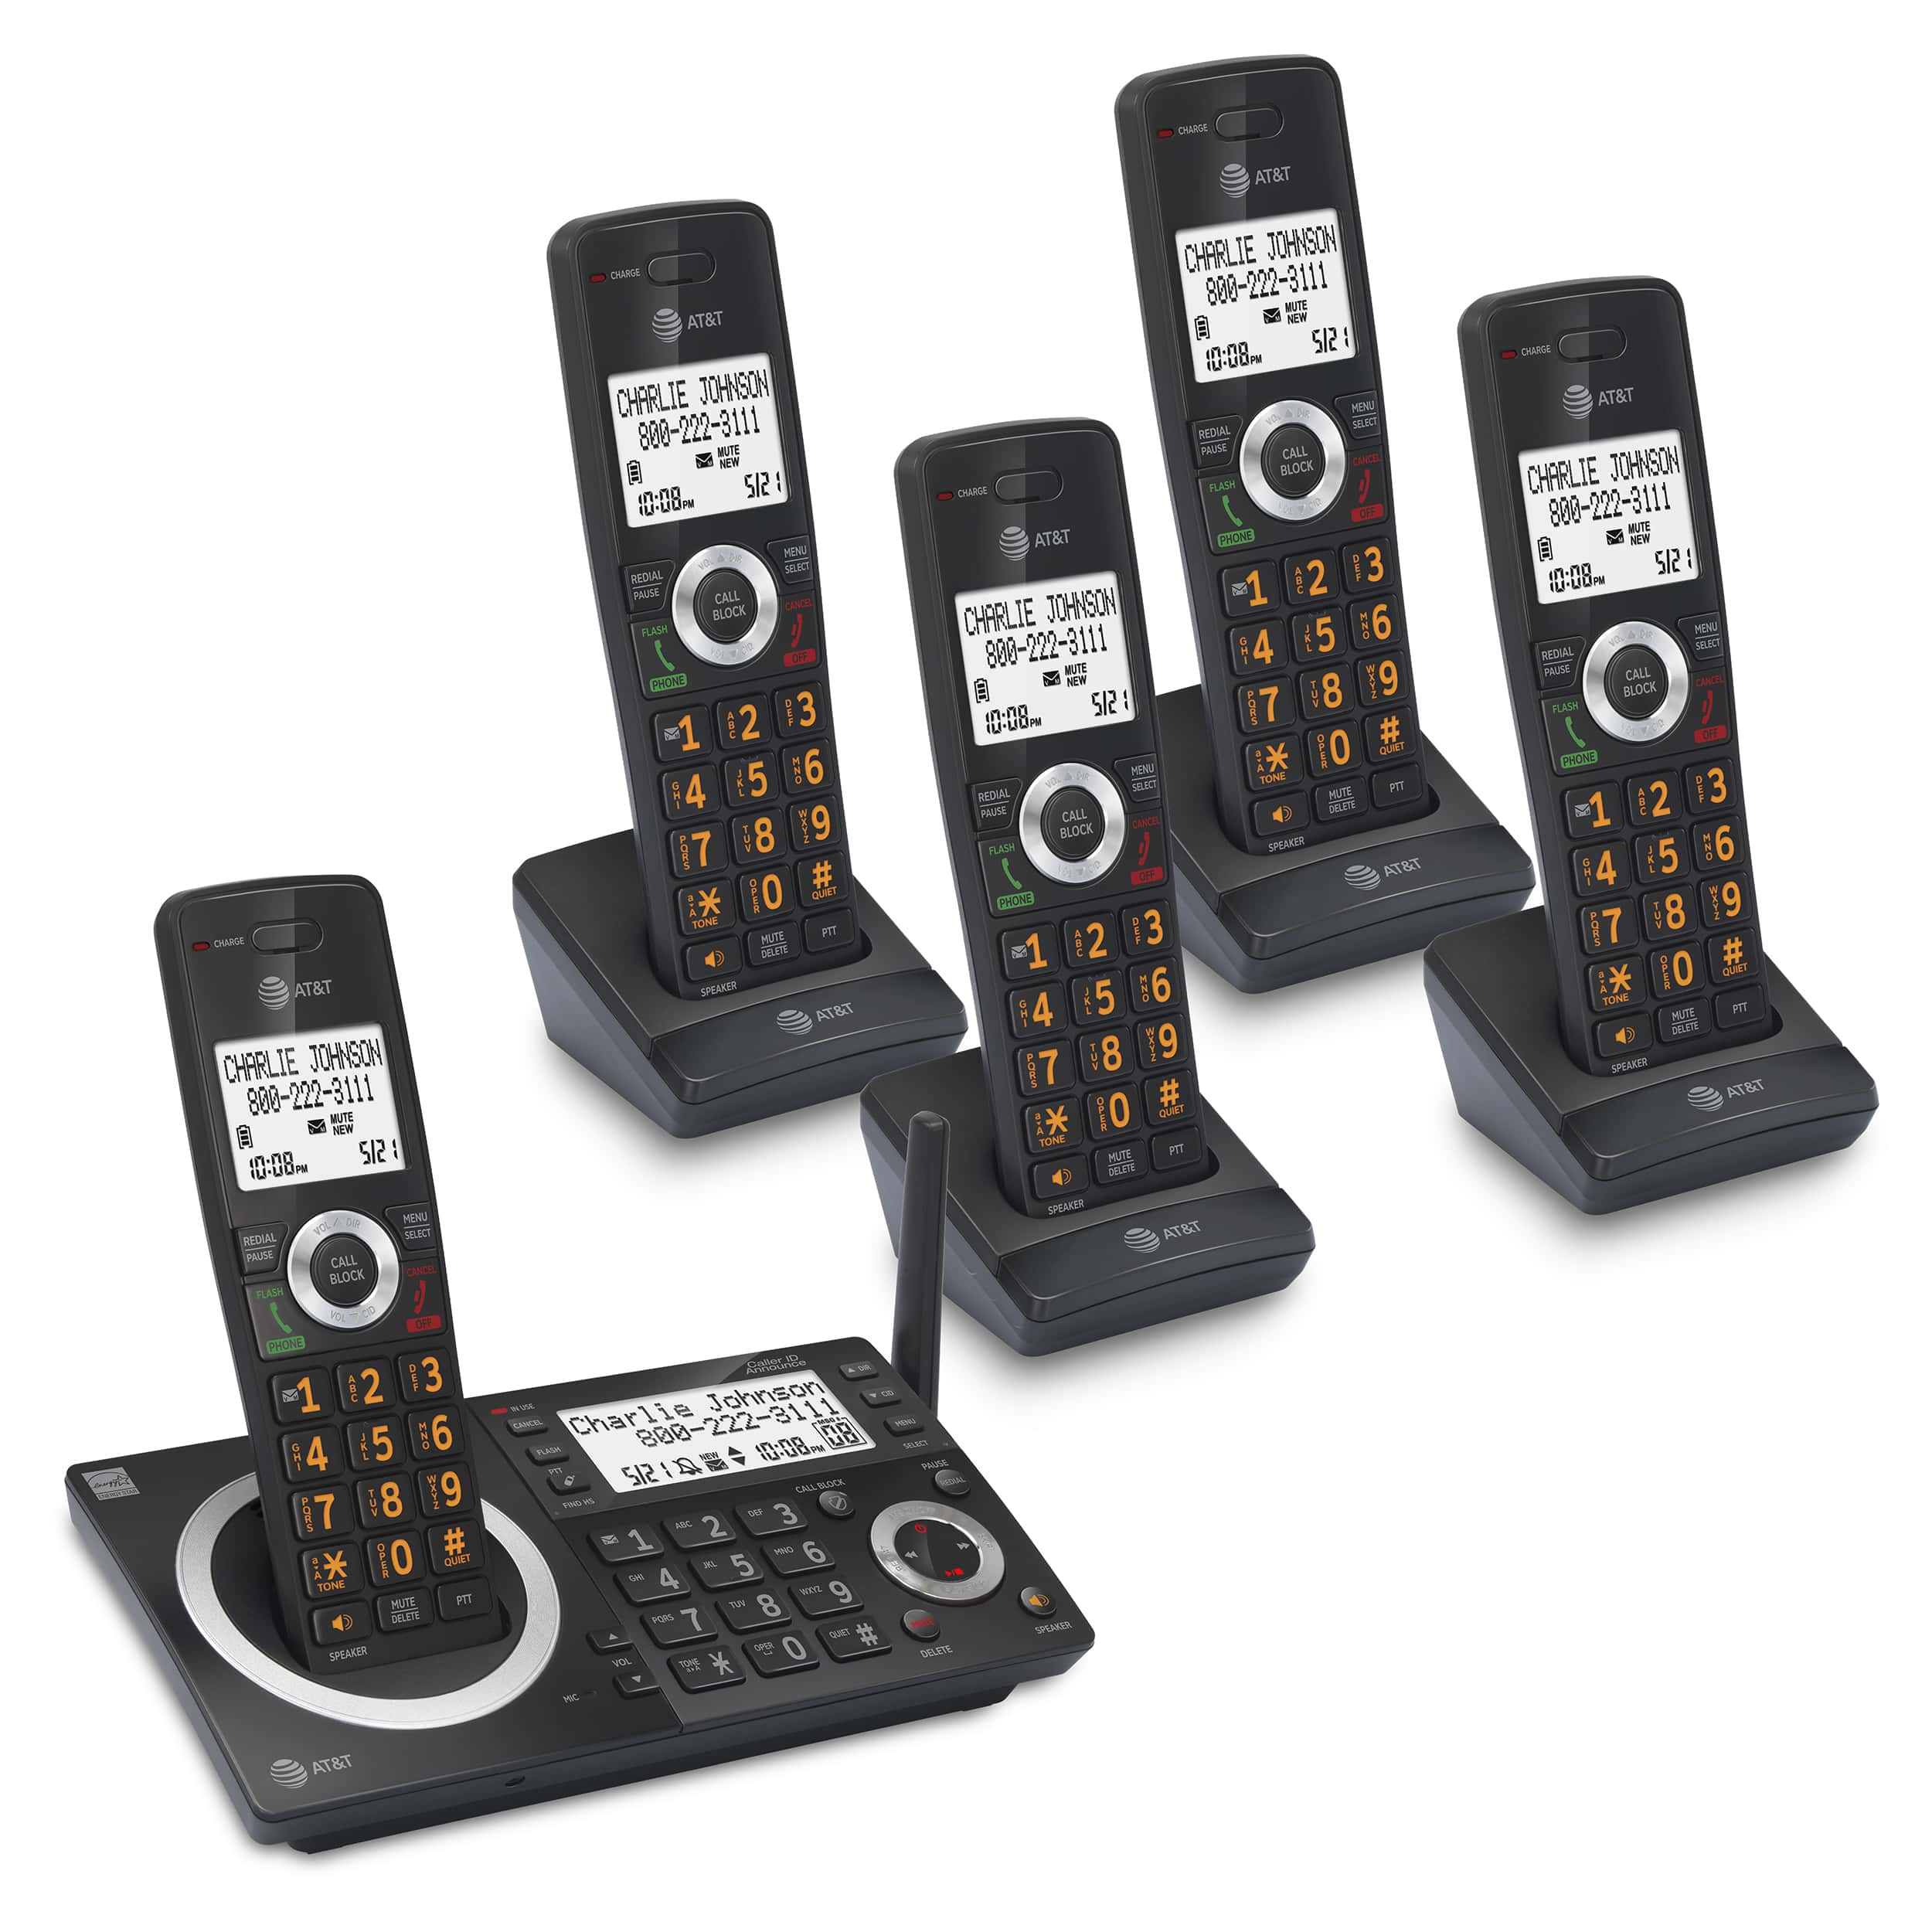 5-Handset Expandable Cordless Phone with Unsurpassed Range, Smart Call Blocker, Dual Keypad and Display, and Answering System - view 3